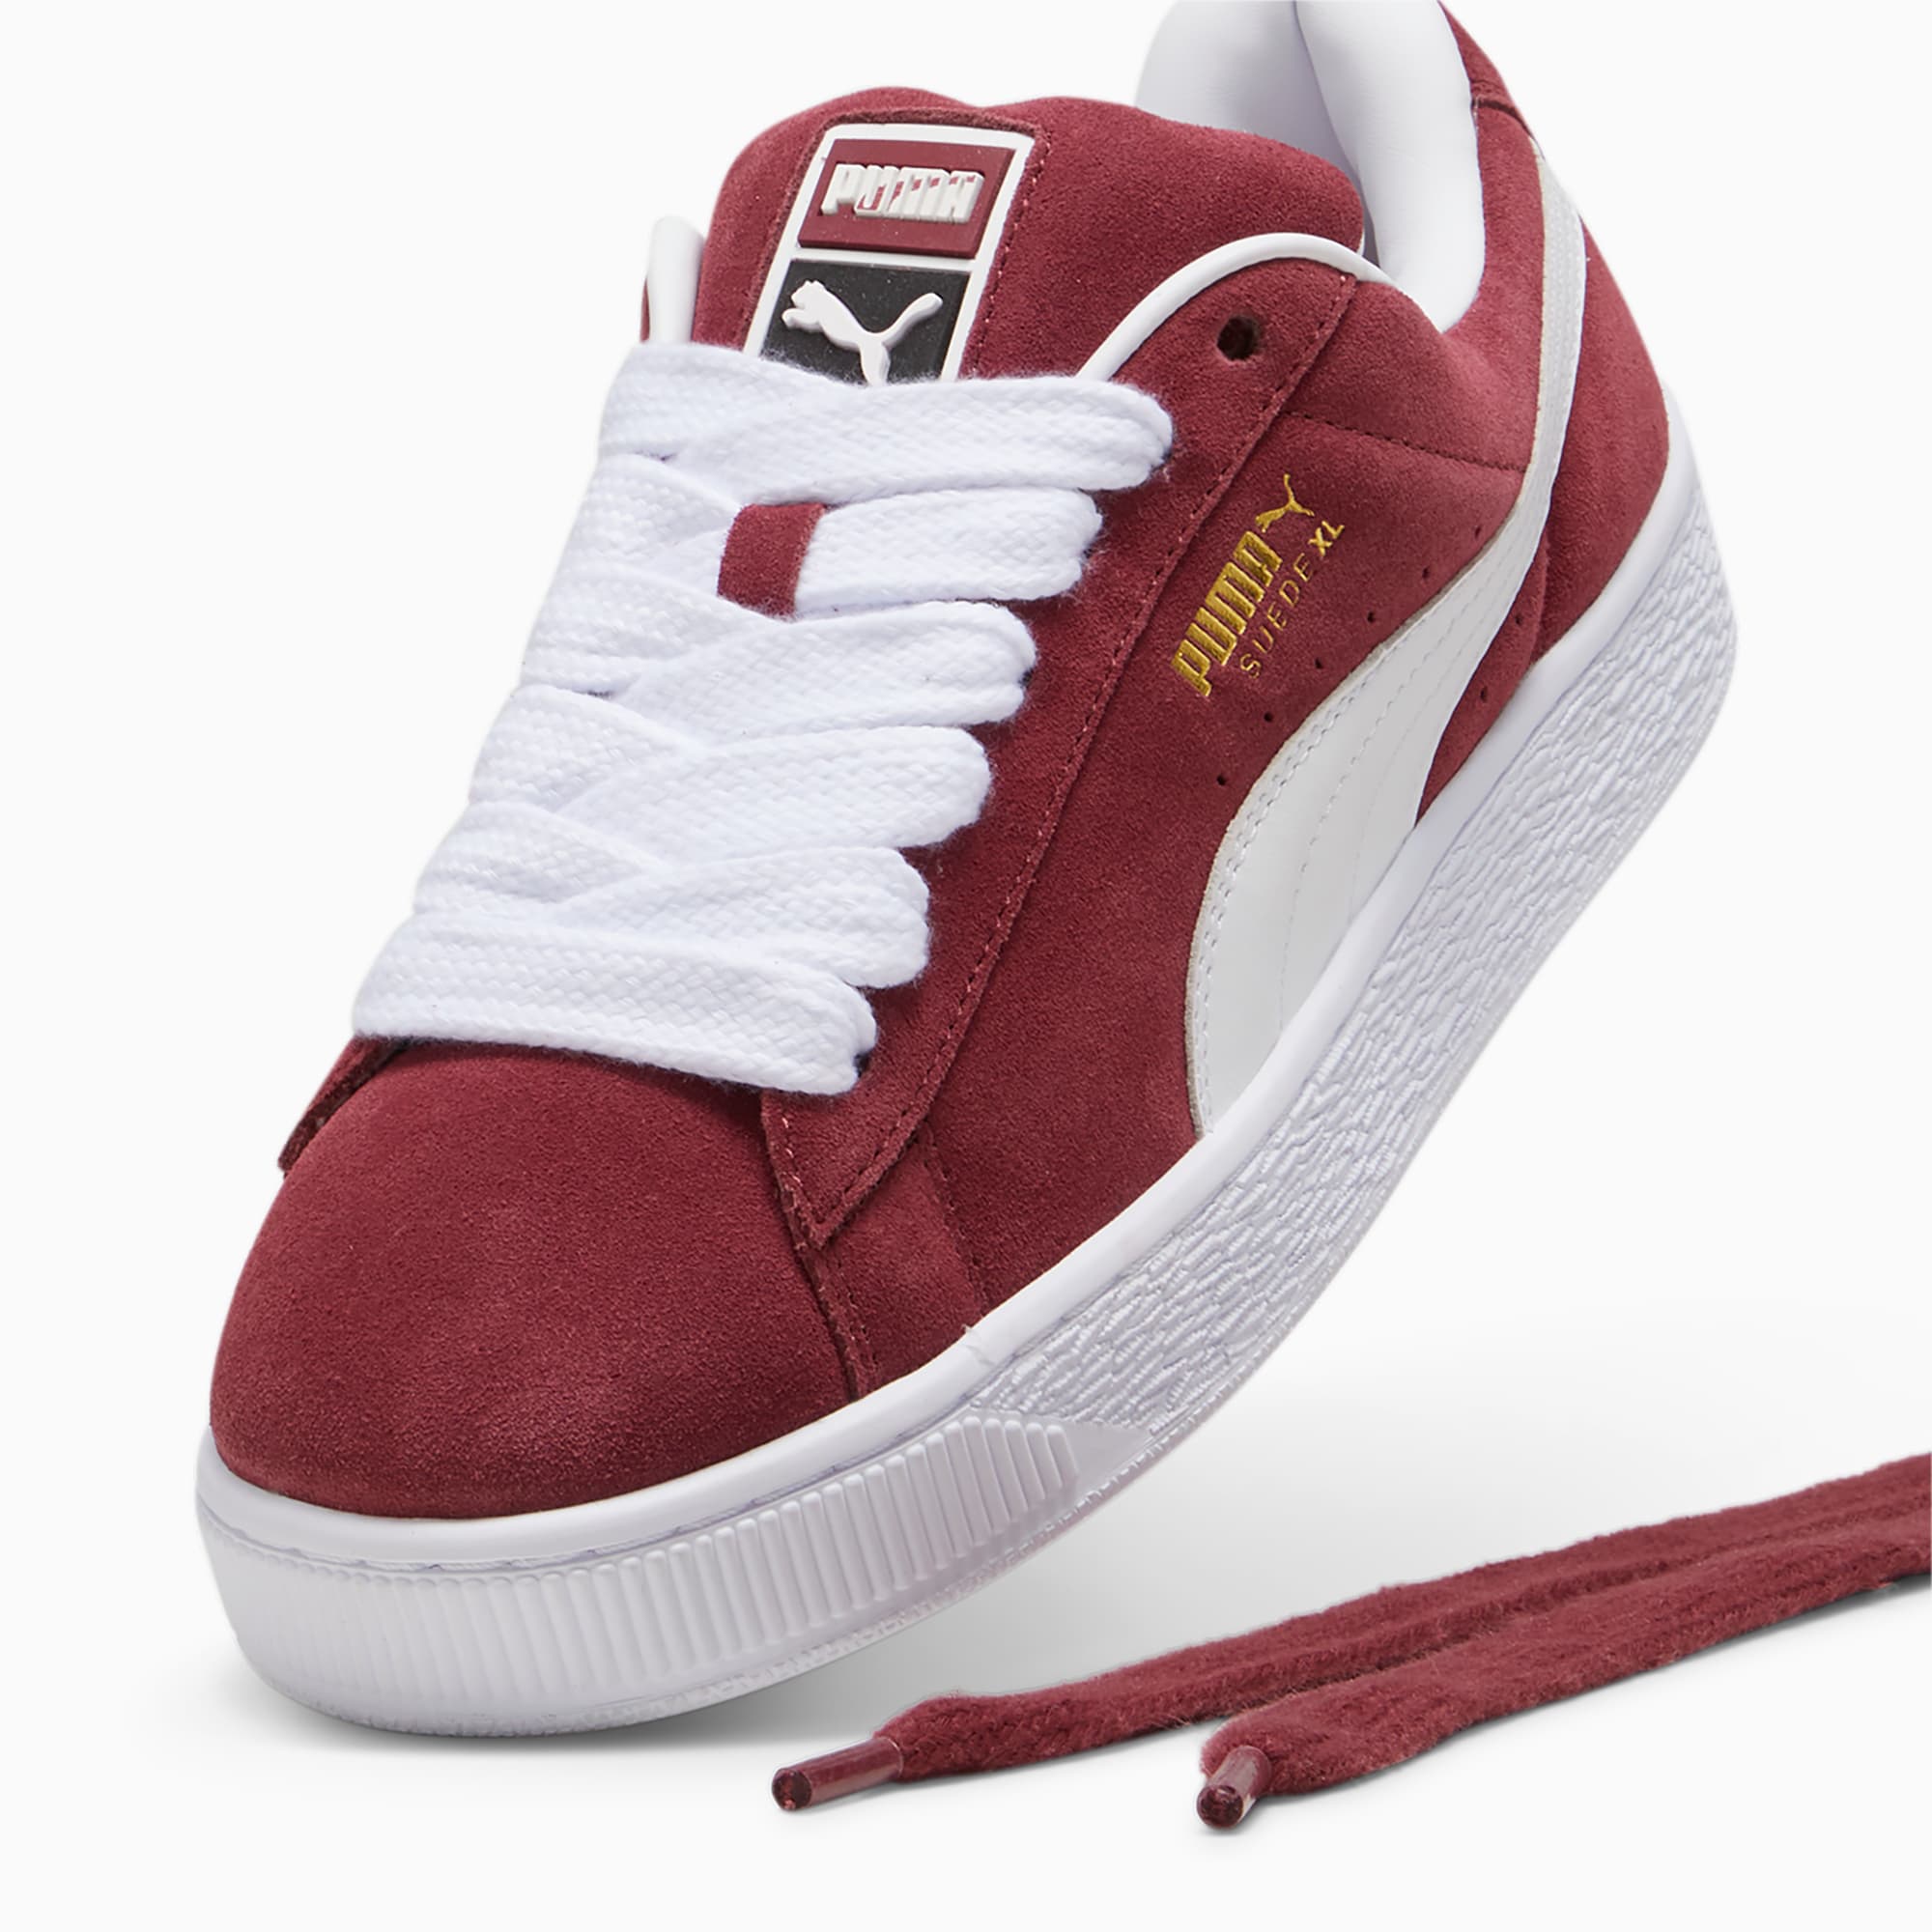 PUMA Suede Xl Sneakers Unisex, Regal Red/White